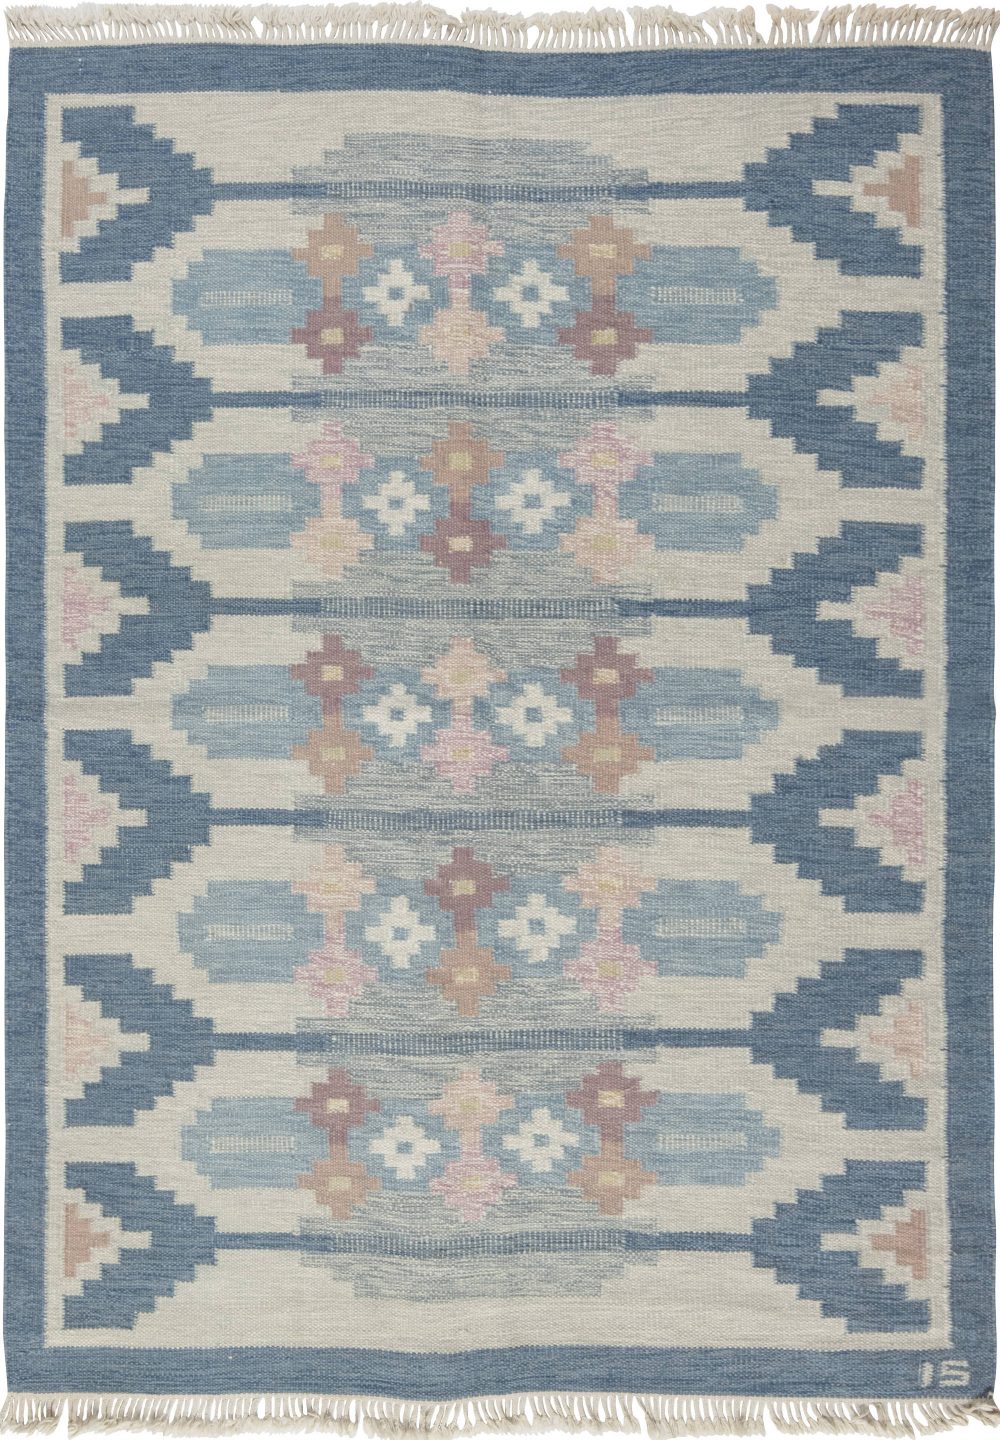 Vintage Swedish Rug by Ingegerd Silow, Woven Signature on Blue Border “IS” BB6561